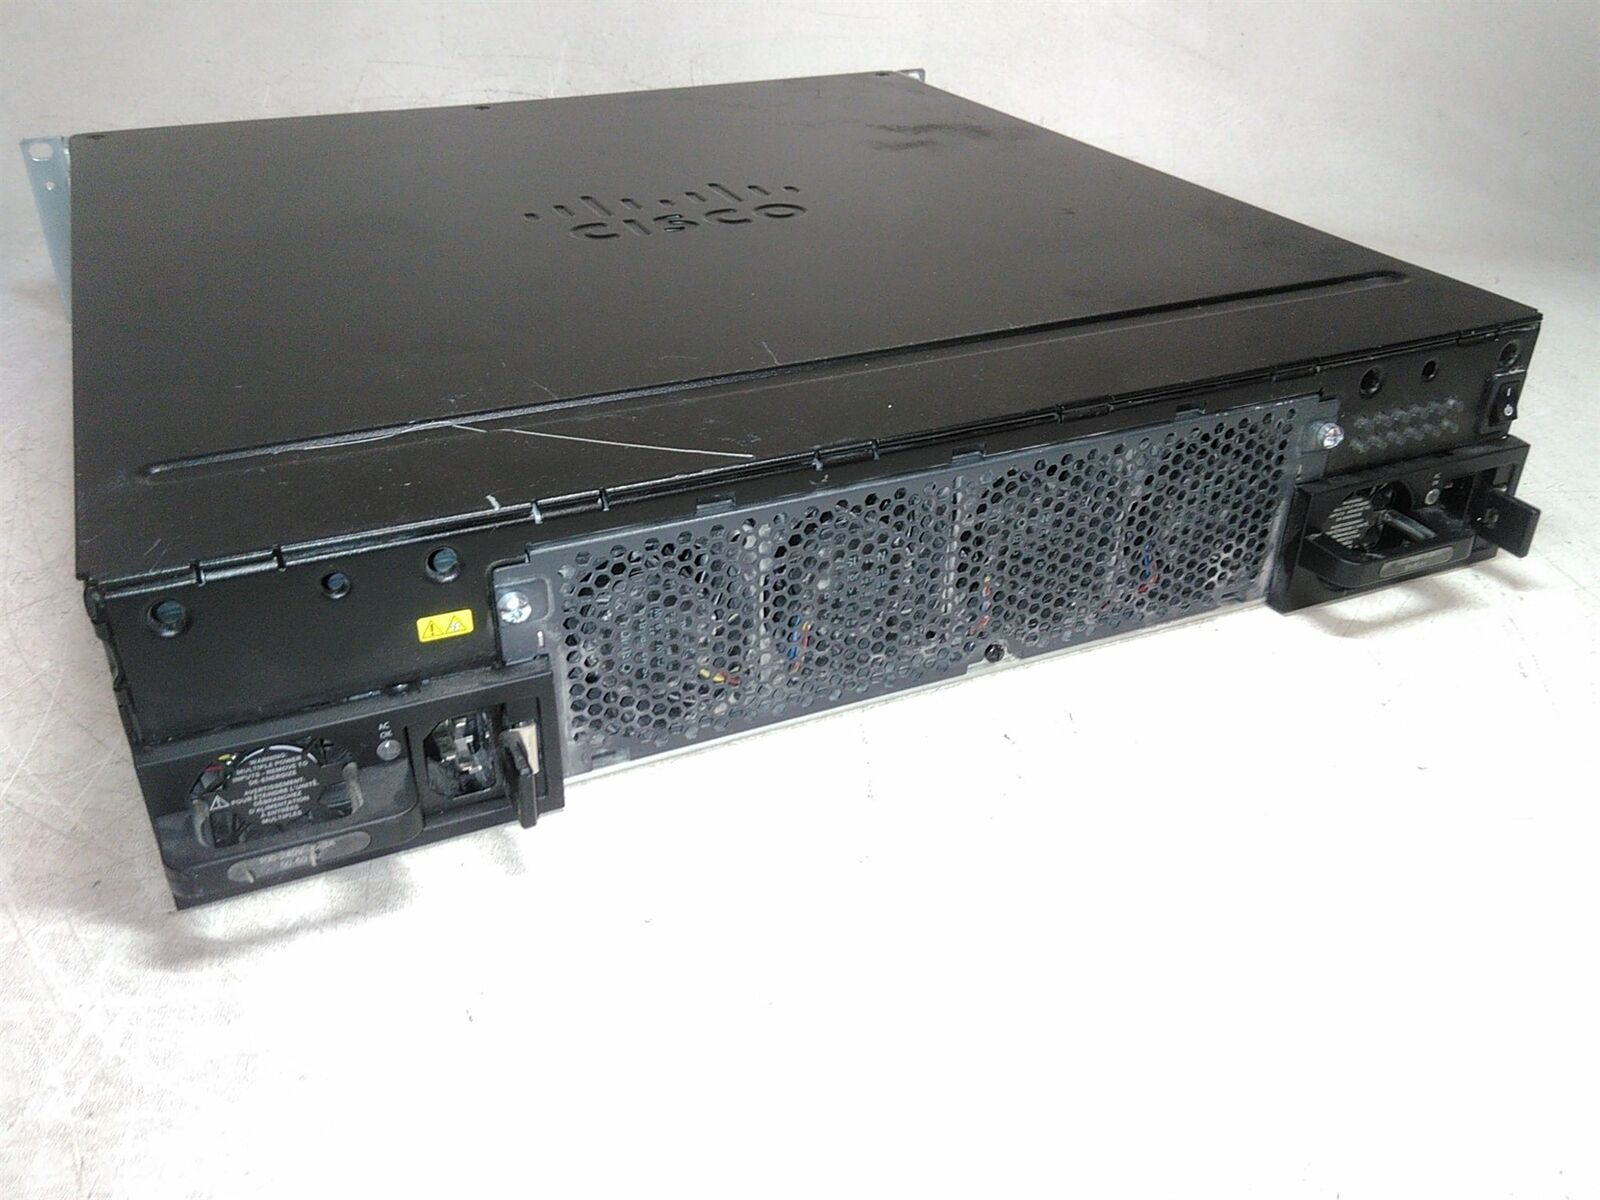 Cisco ISR4451-X/K9 Integrated Service Router Securityk9 Dual AC PSU